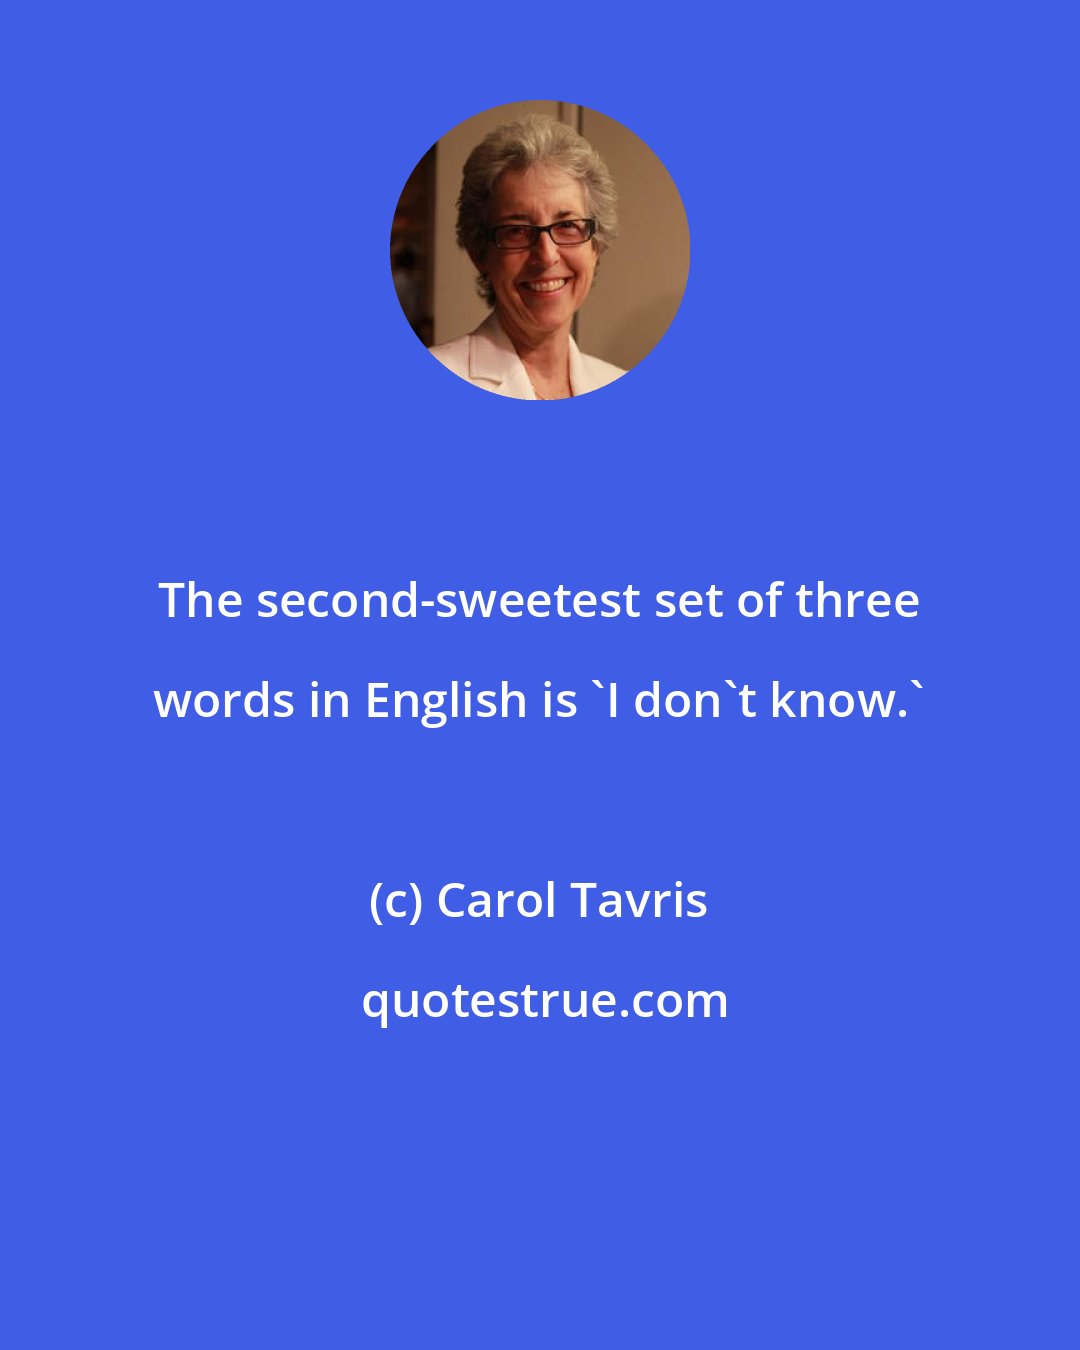 Carol Tavris: The second-sweetest set of three words in English is 'I don't know.'